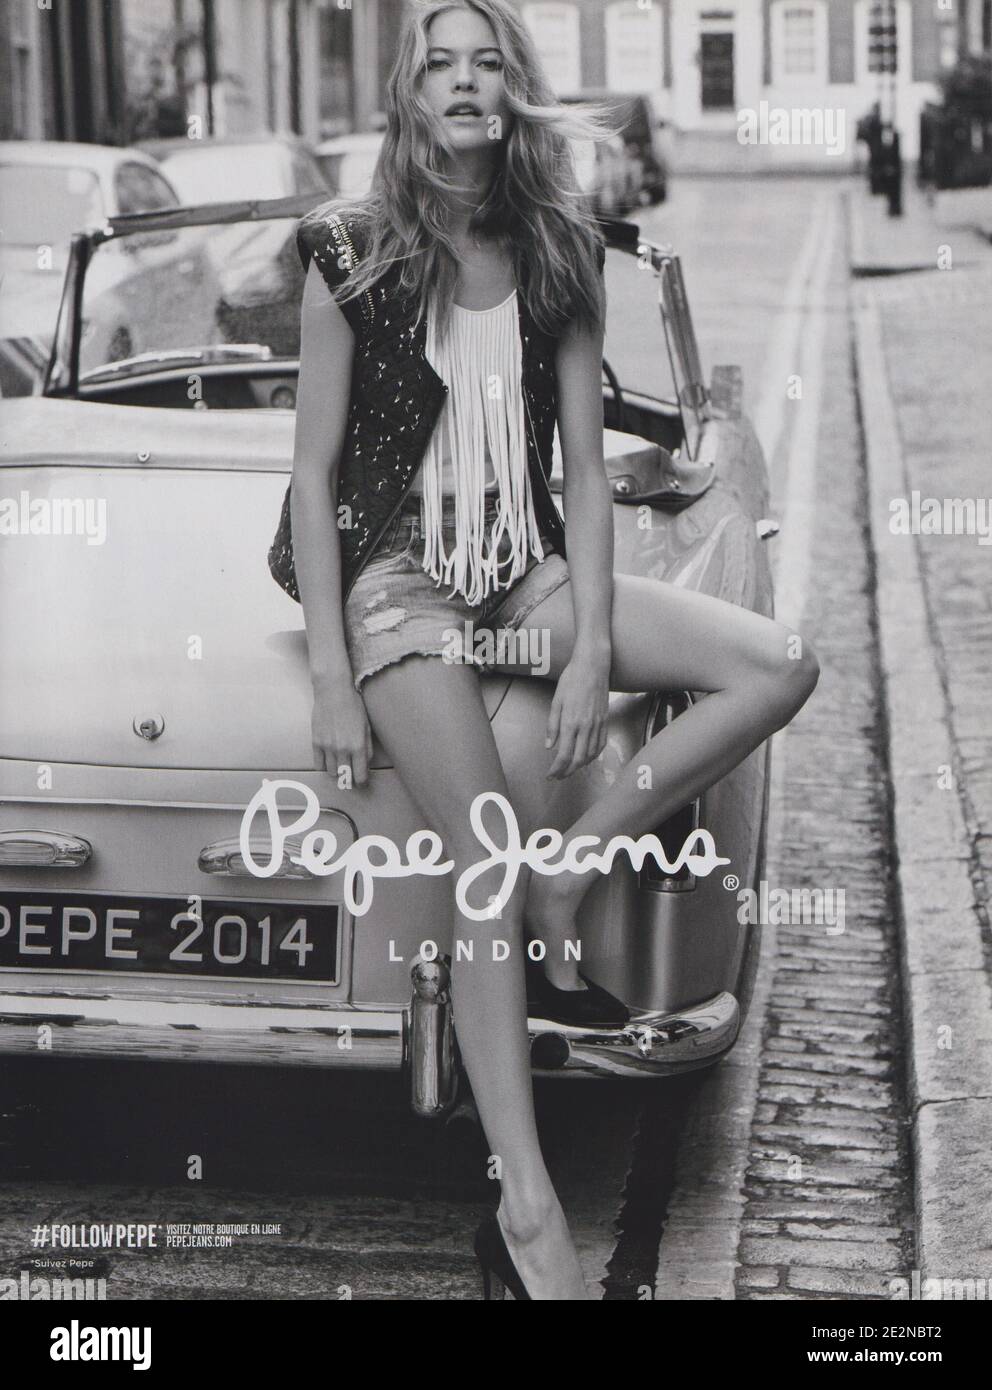 Pepe Jeans High Resolution Stock Photography and Images - Alamy